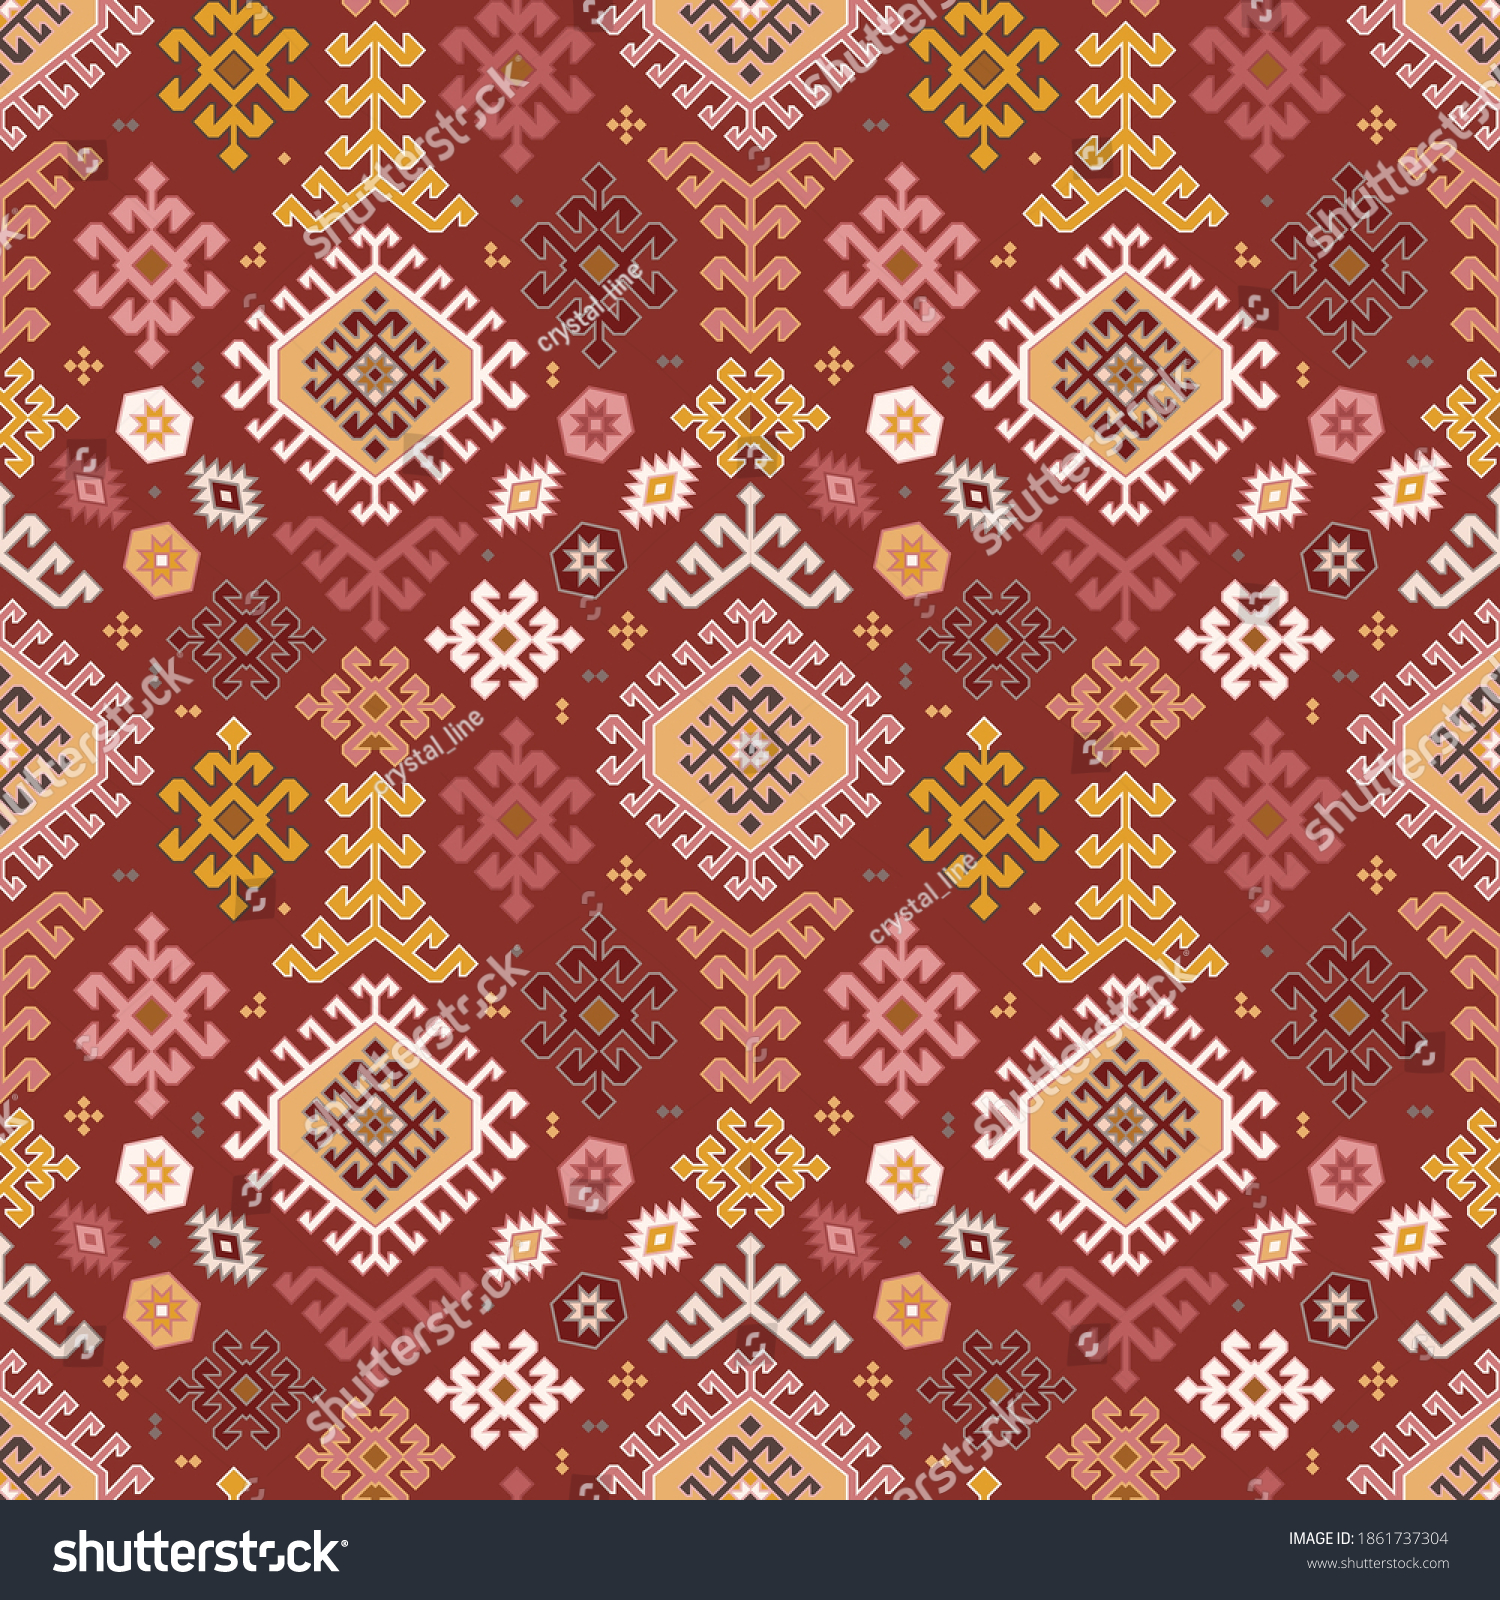 Kilim bohemian seamless pattern in vector format for printed fabrics or any other purposes. The pattern is tileable and easy to use. #1861737304